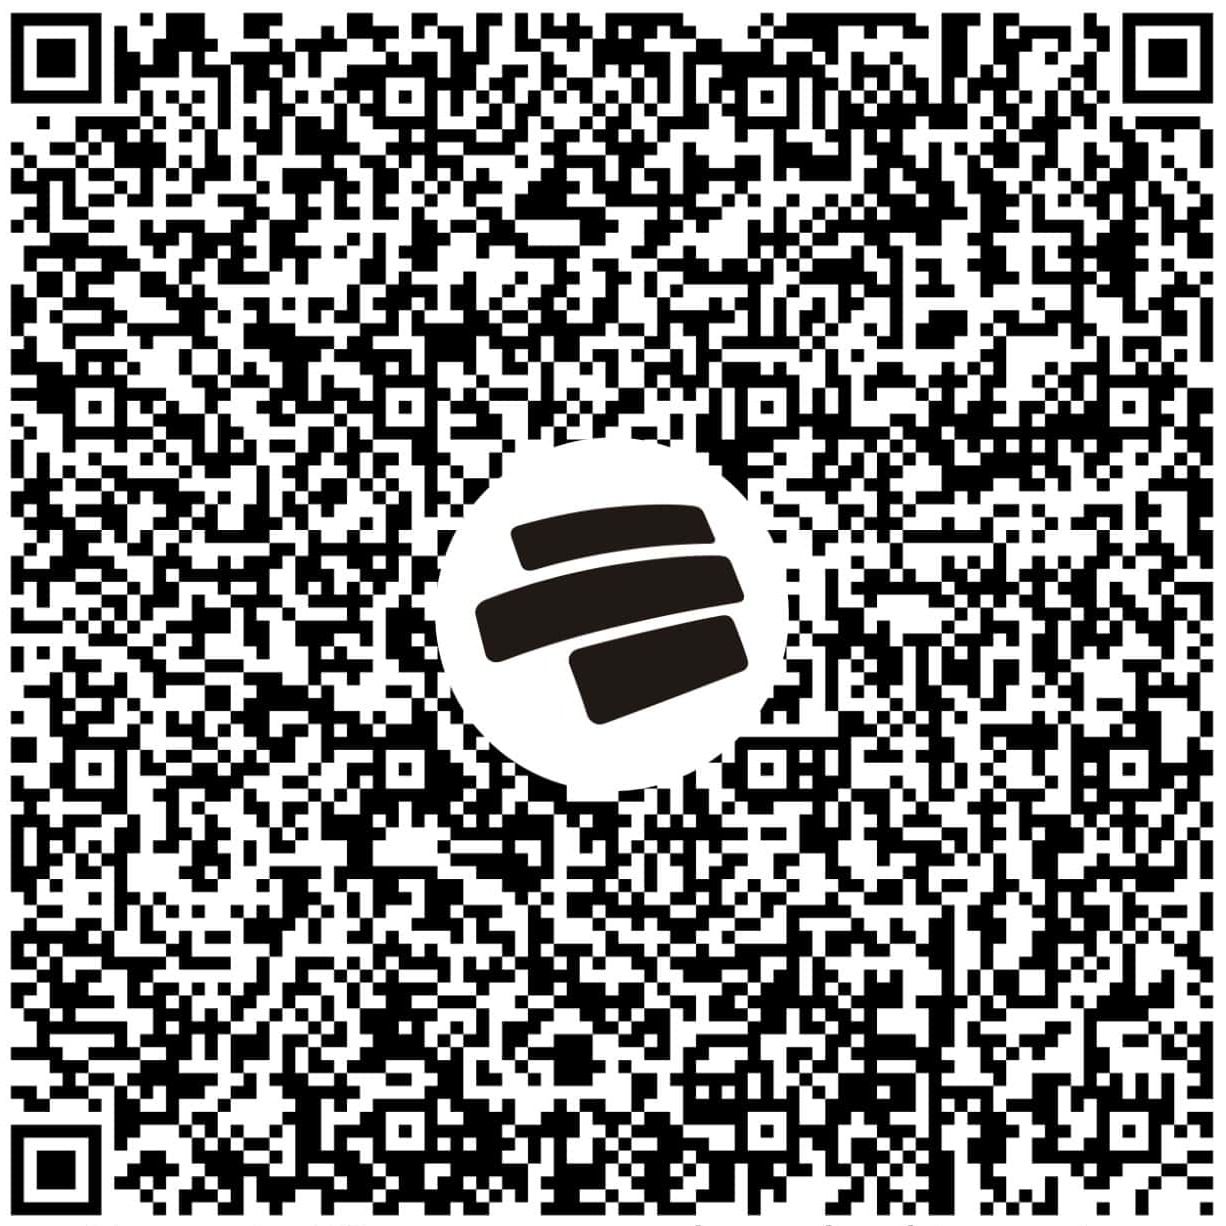 QR pago Bancolombia